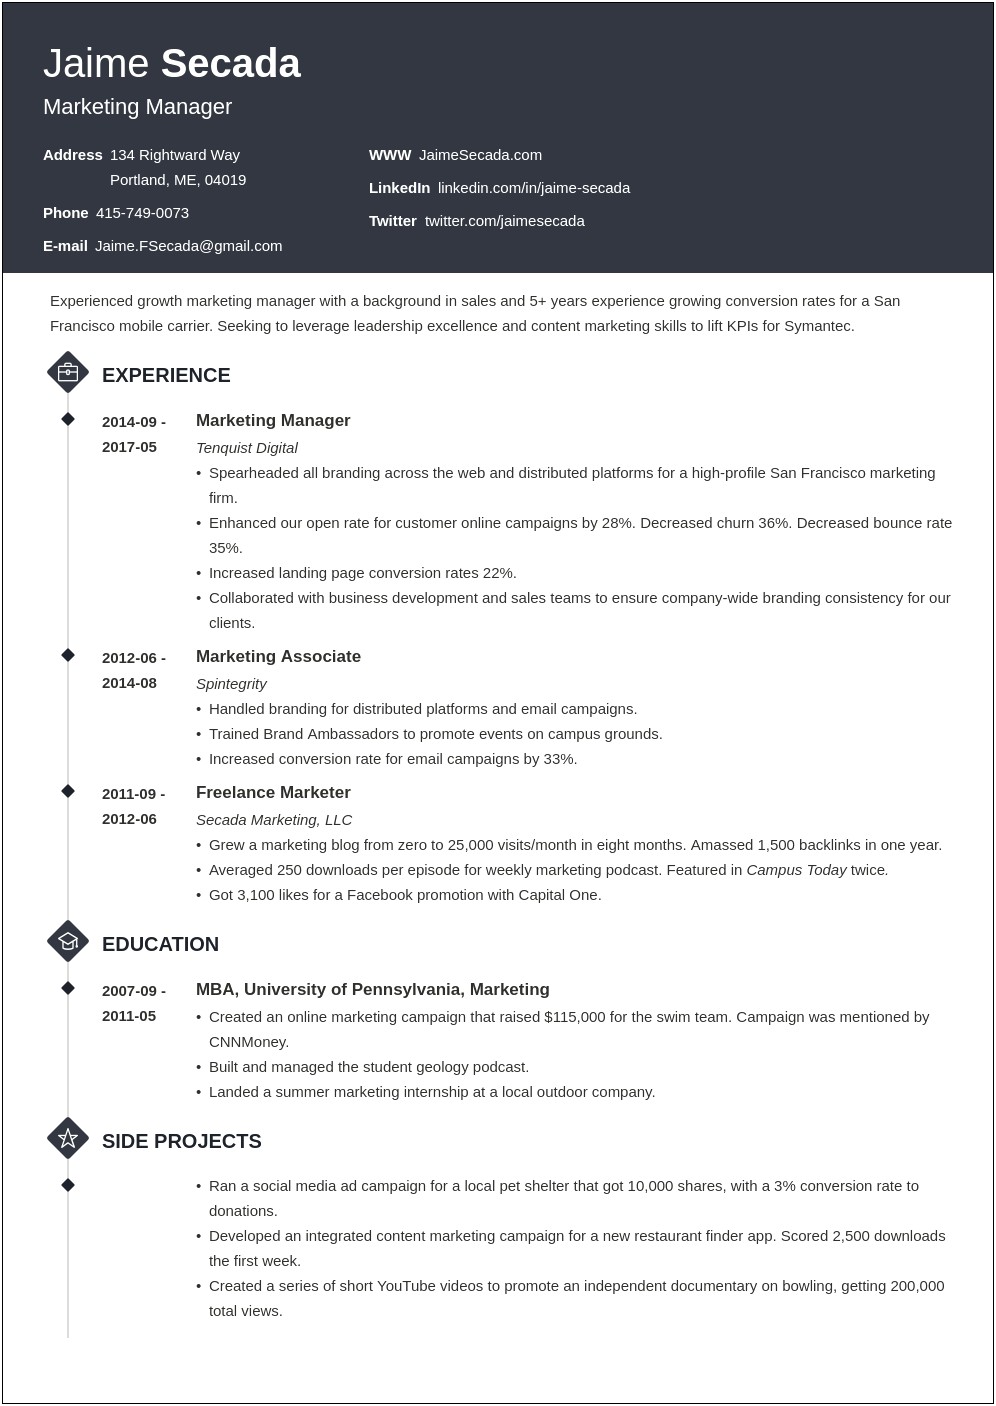 Experience Resume Format One Year Experience In Marketing